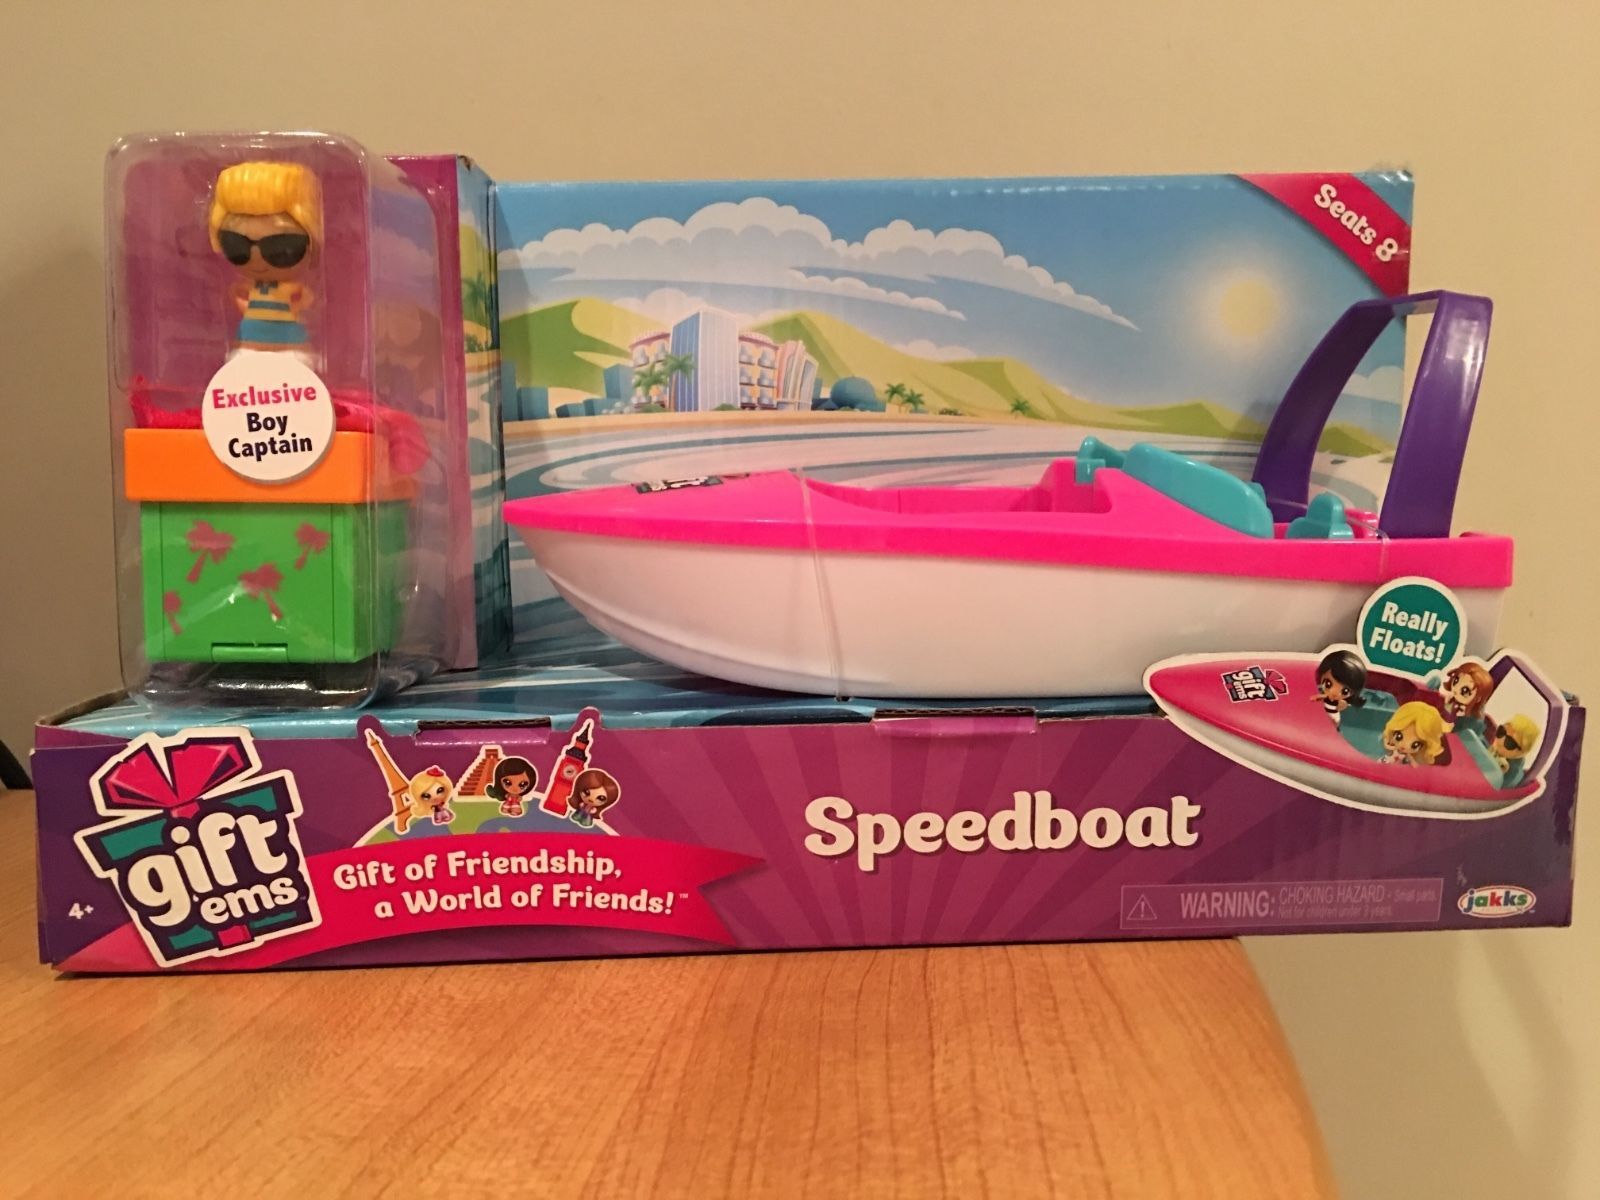 Gift'ems Speed boat Playset New Series 2 Seats 8 Exclusive Boy Captain - $19.24